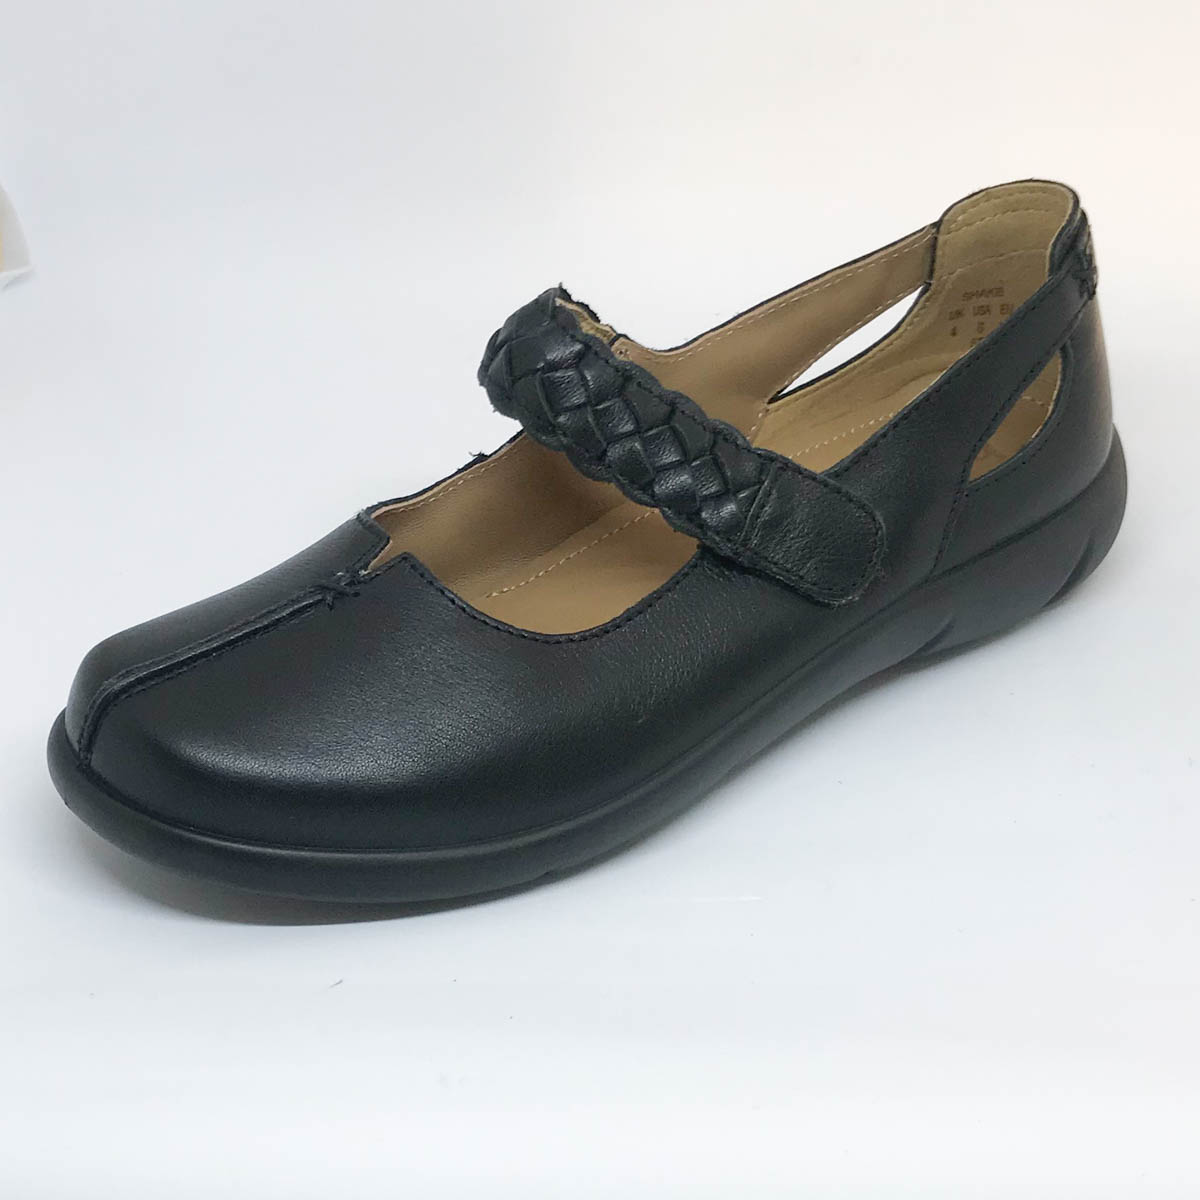 hotter shoes womens wide fit